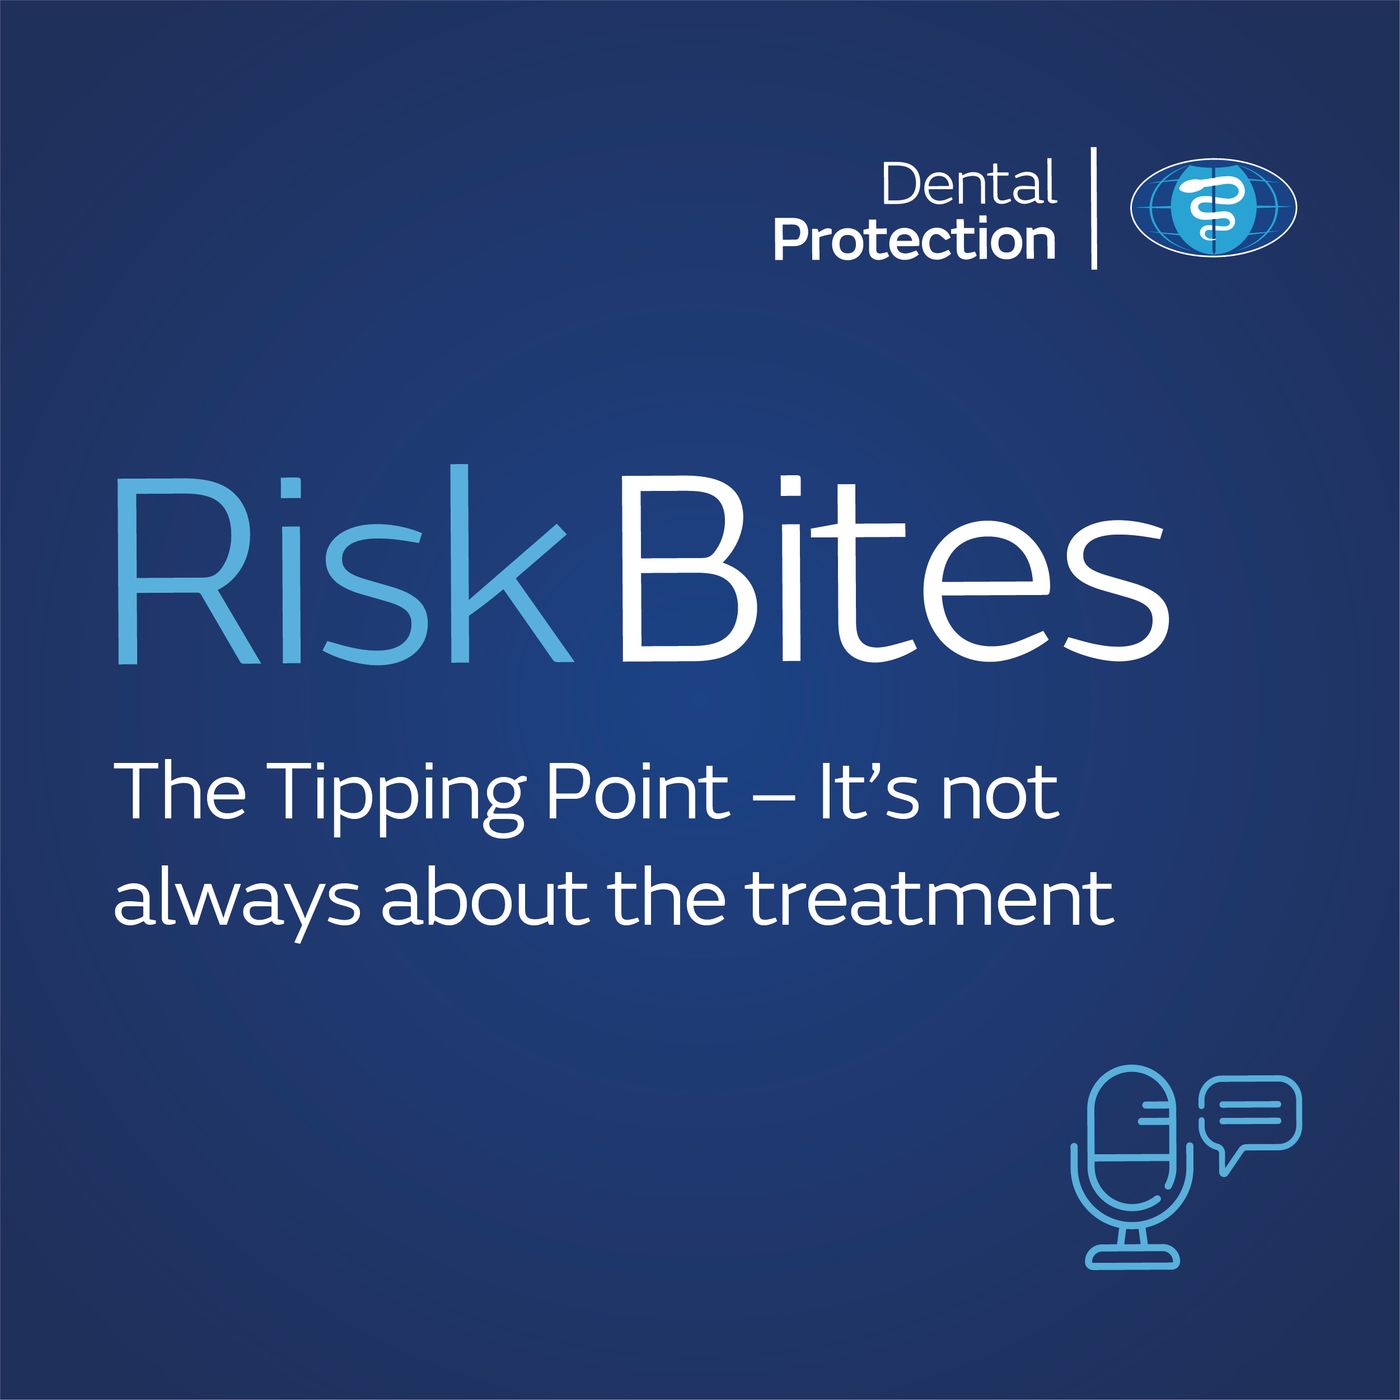 RiskBites - The Tipping Point - It’s not always about the treatment